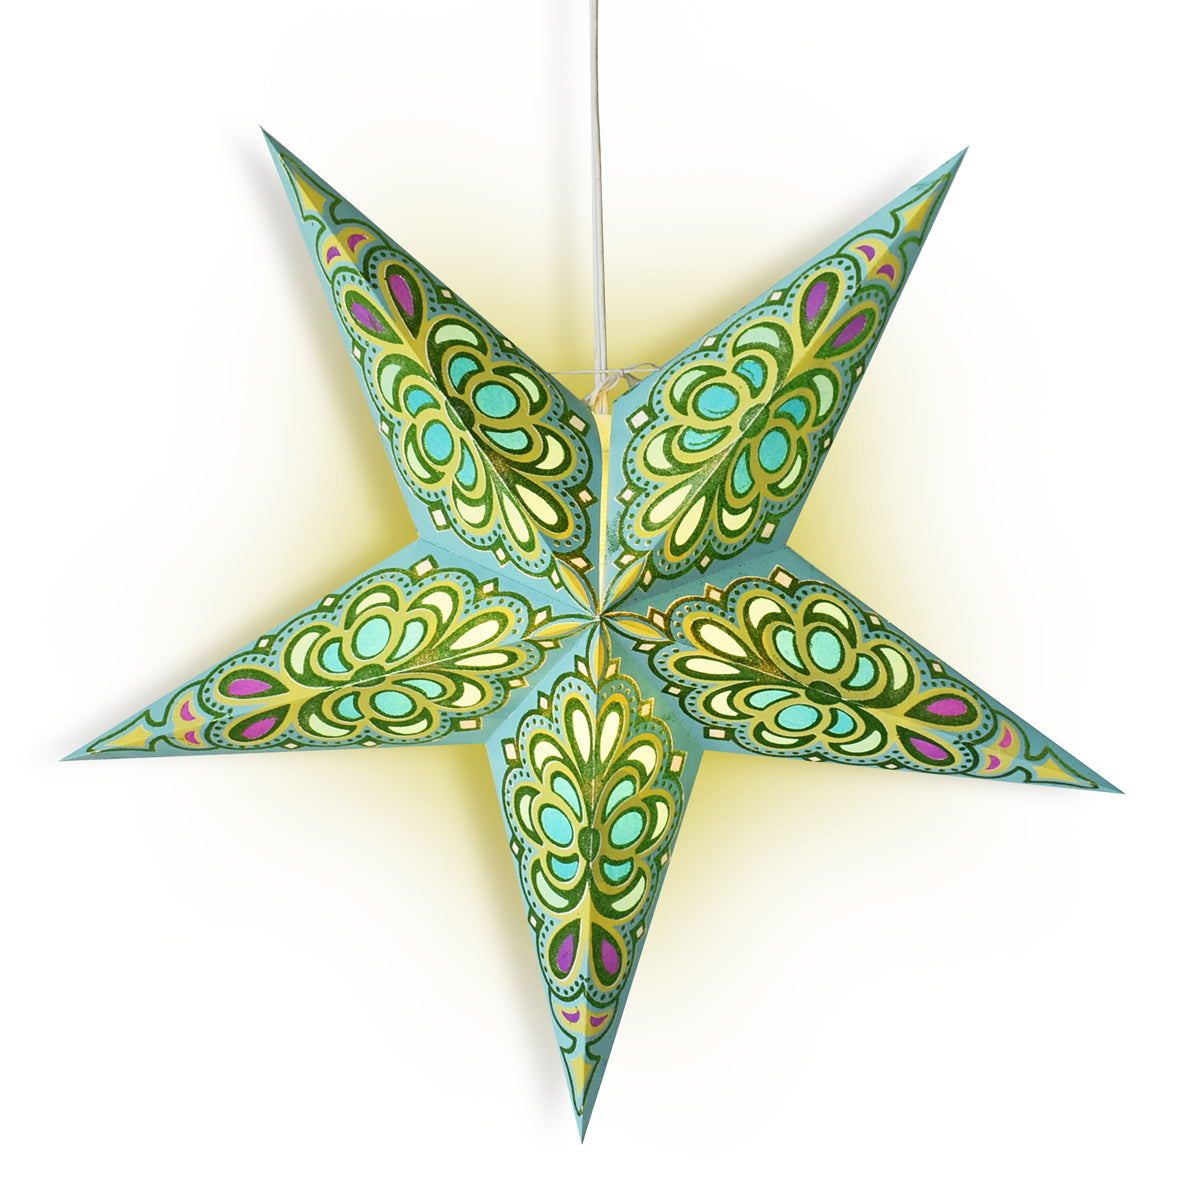 24&quot; Green / Turquoise Merry Gold Glitter Paper Star Lantern, Chinese Hanging Wedding &amp; Party Decoration - PaperLanternStore.com - Paper Lanterns, Decor, Party Lights &amp; More